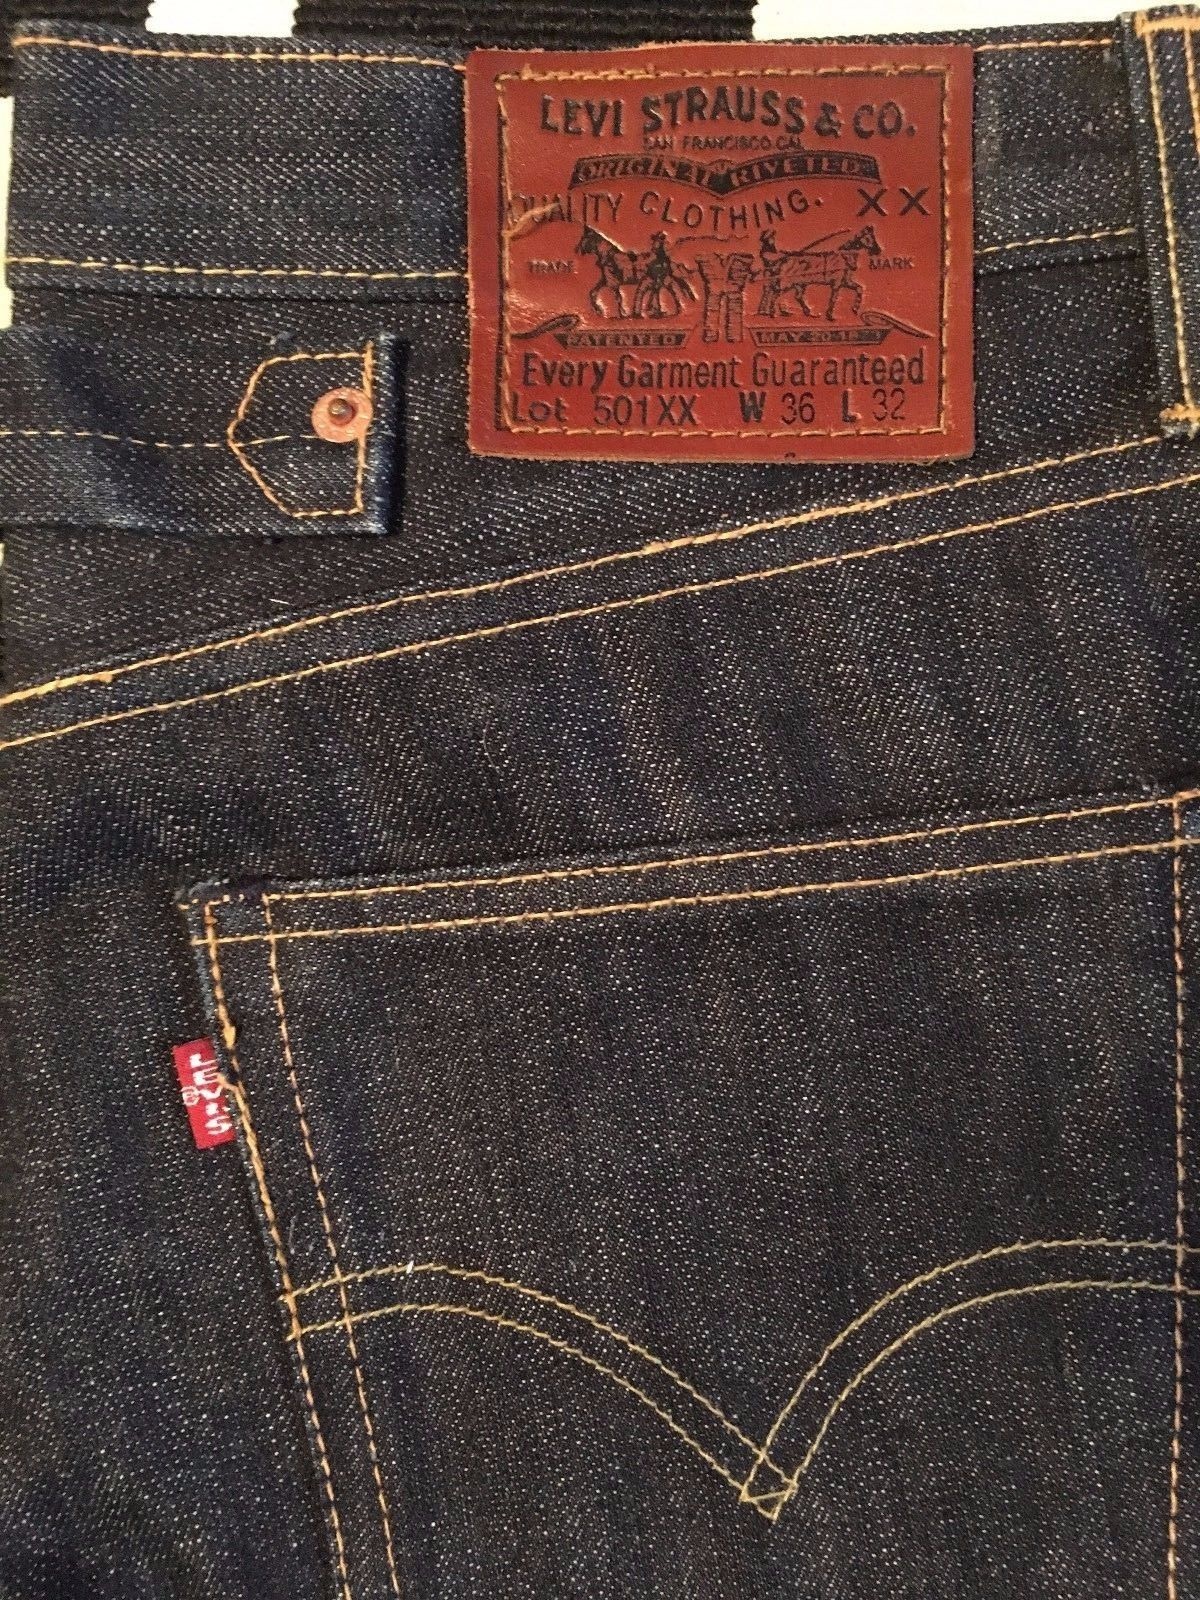 how to identify vintage levis 501